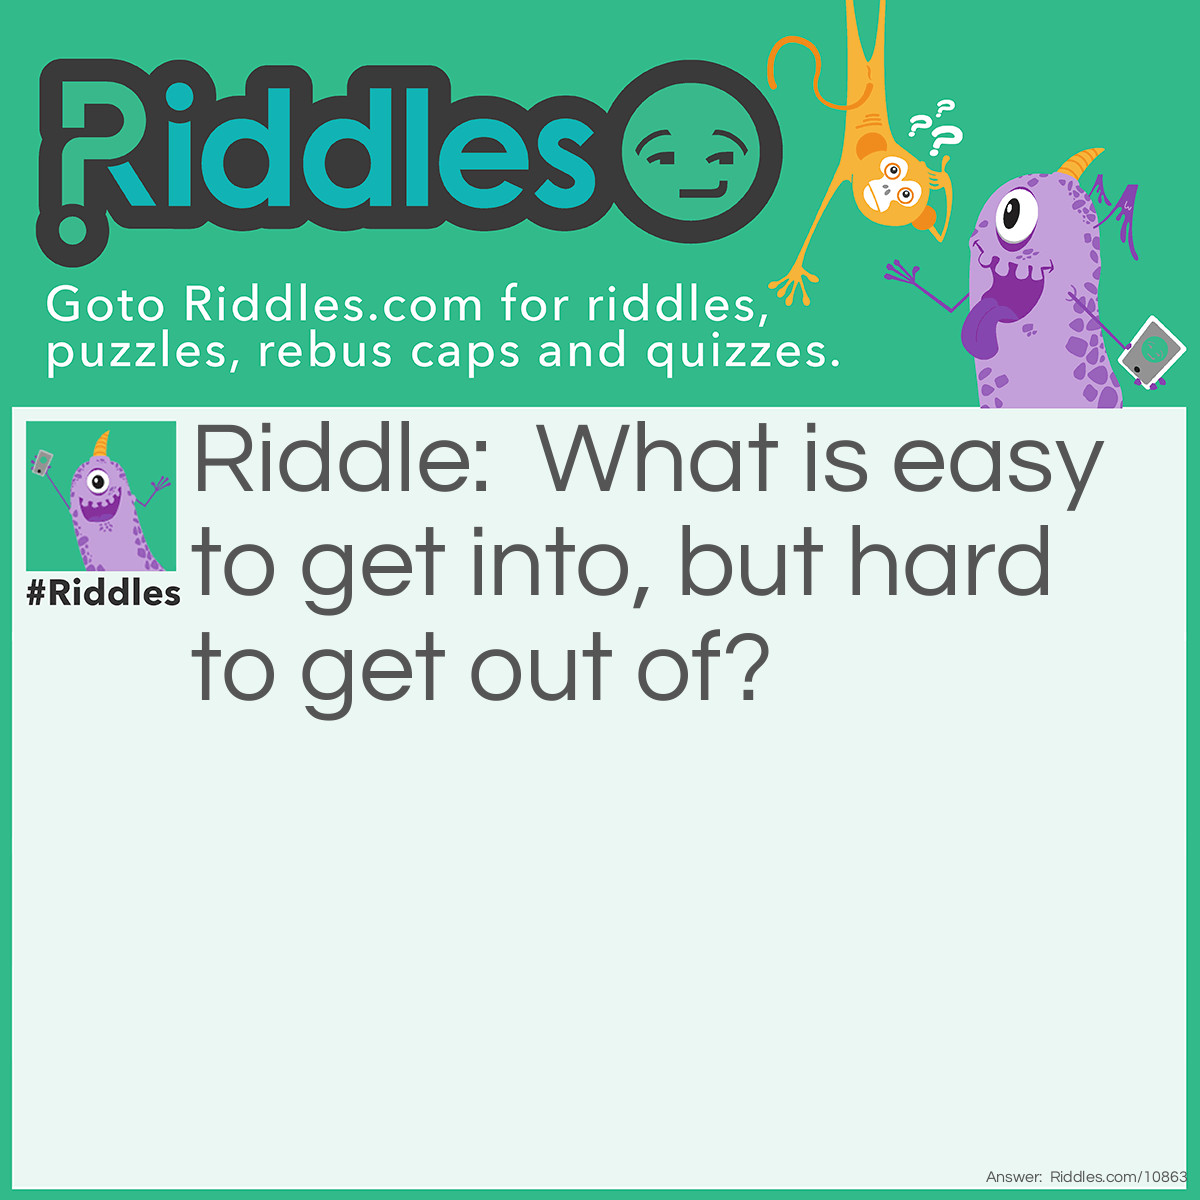 Riddle: What is easy to get into, but hard to get out of? Answer: Trouble!